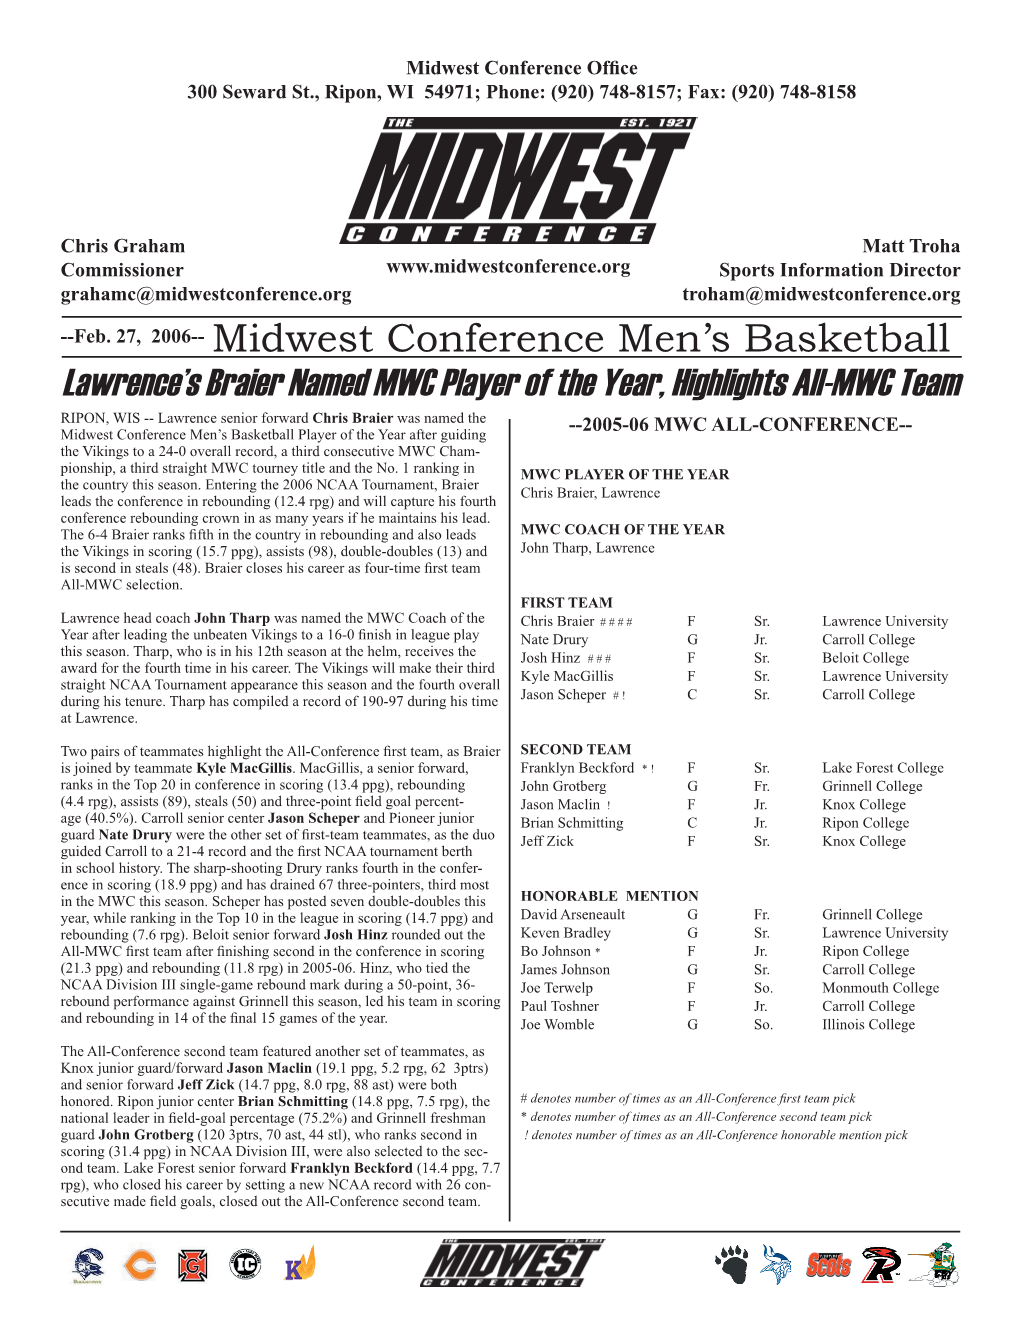 Midwest Conference Men's Basketball